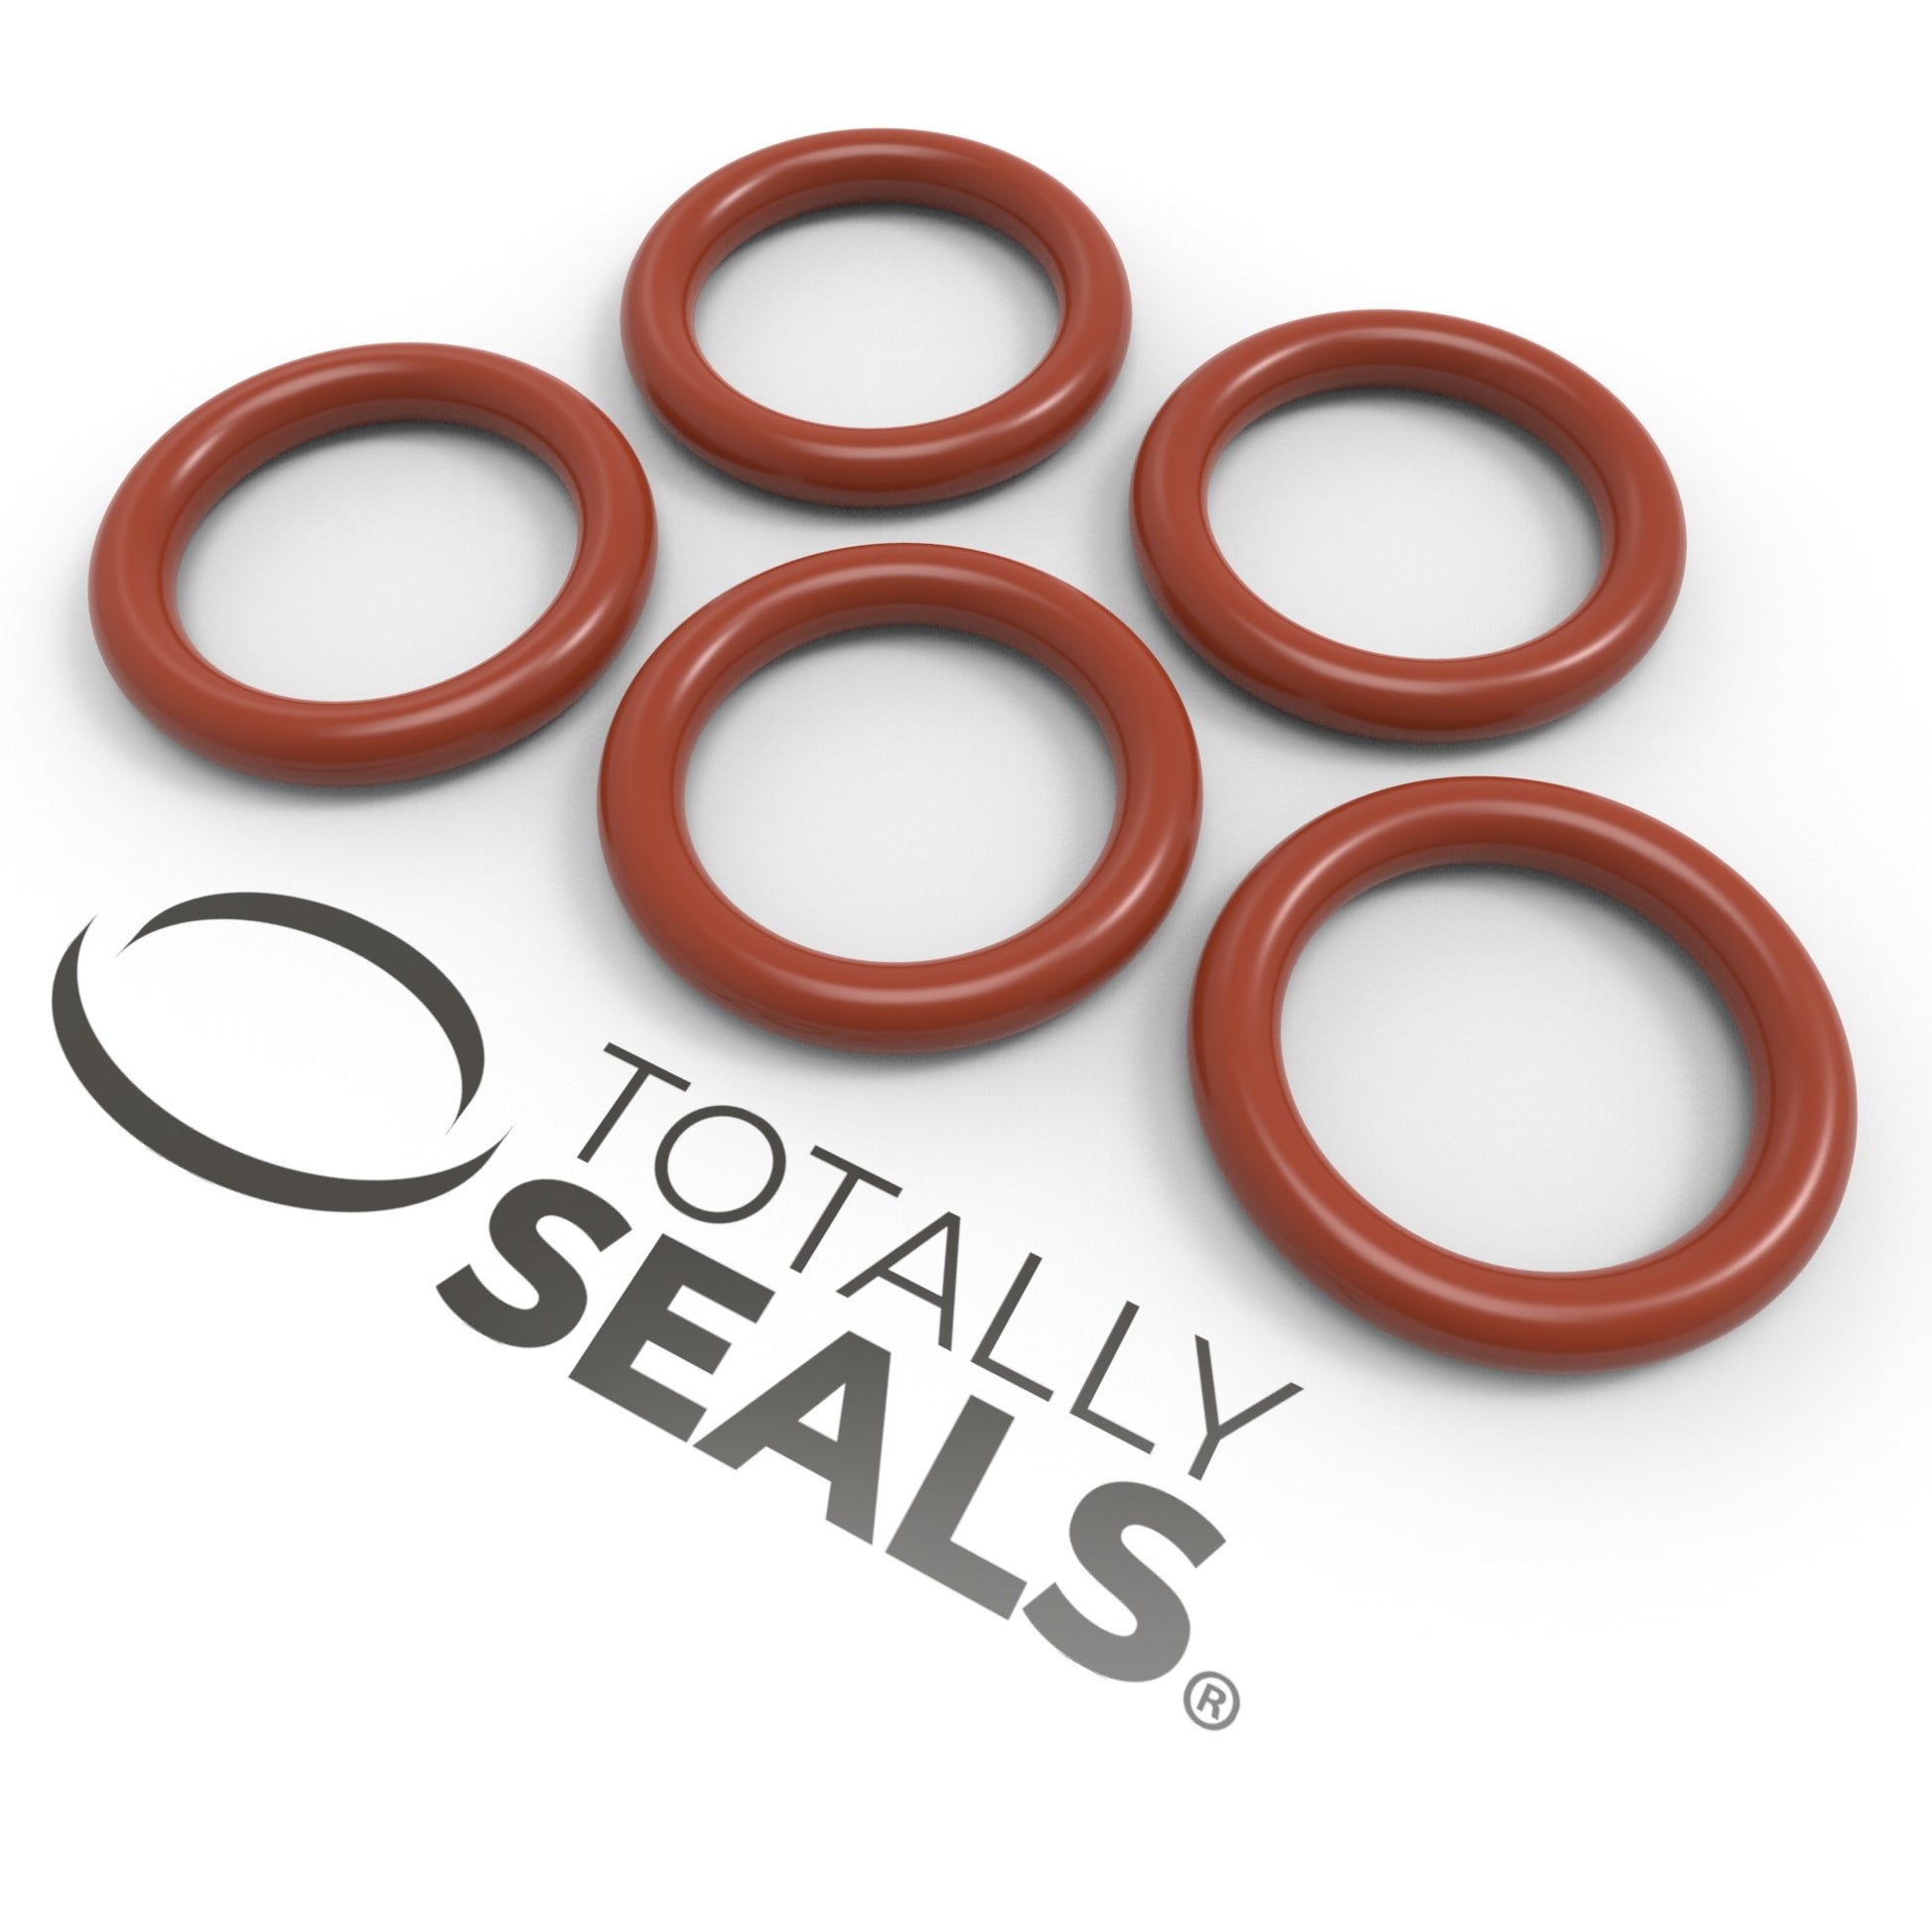 10mm x 3mm (16mm OD) Silicone O-Rings - Totally Seals®